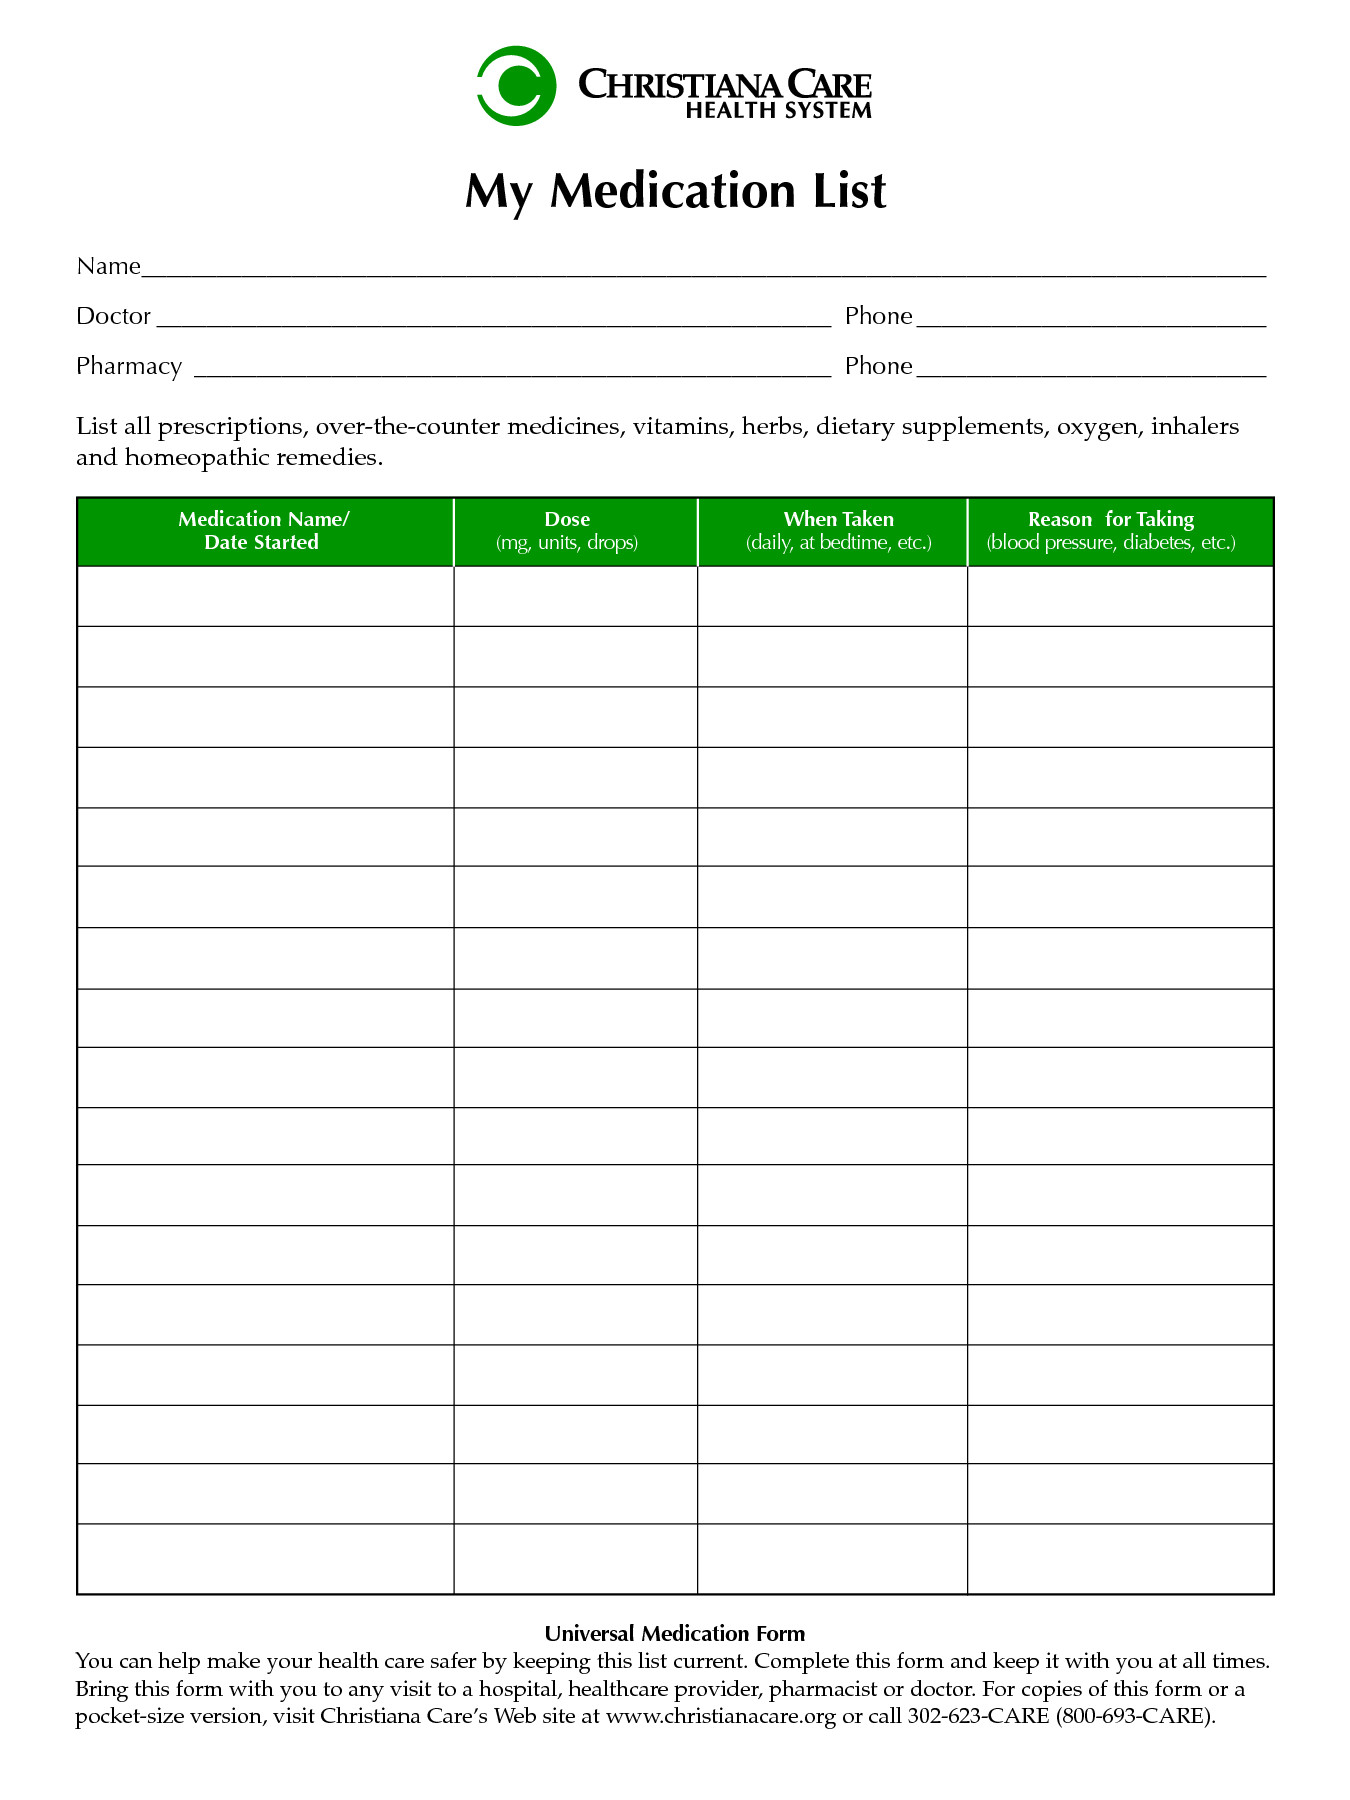 Free Printable Medication List Template Medication List Wallet Cards for Patients